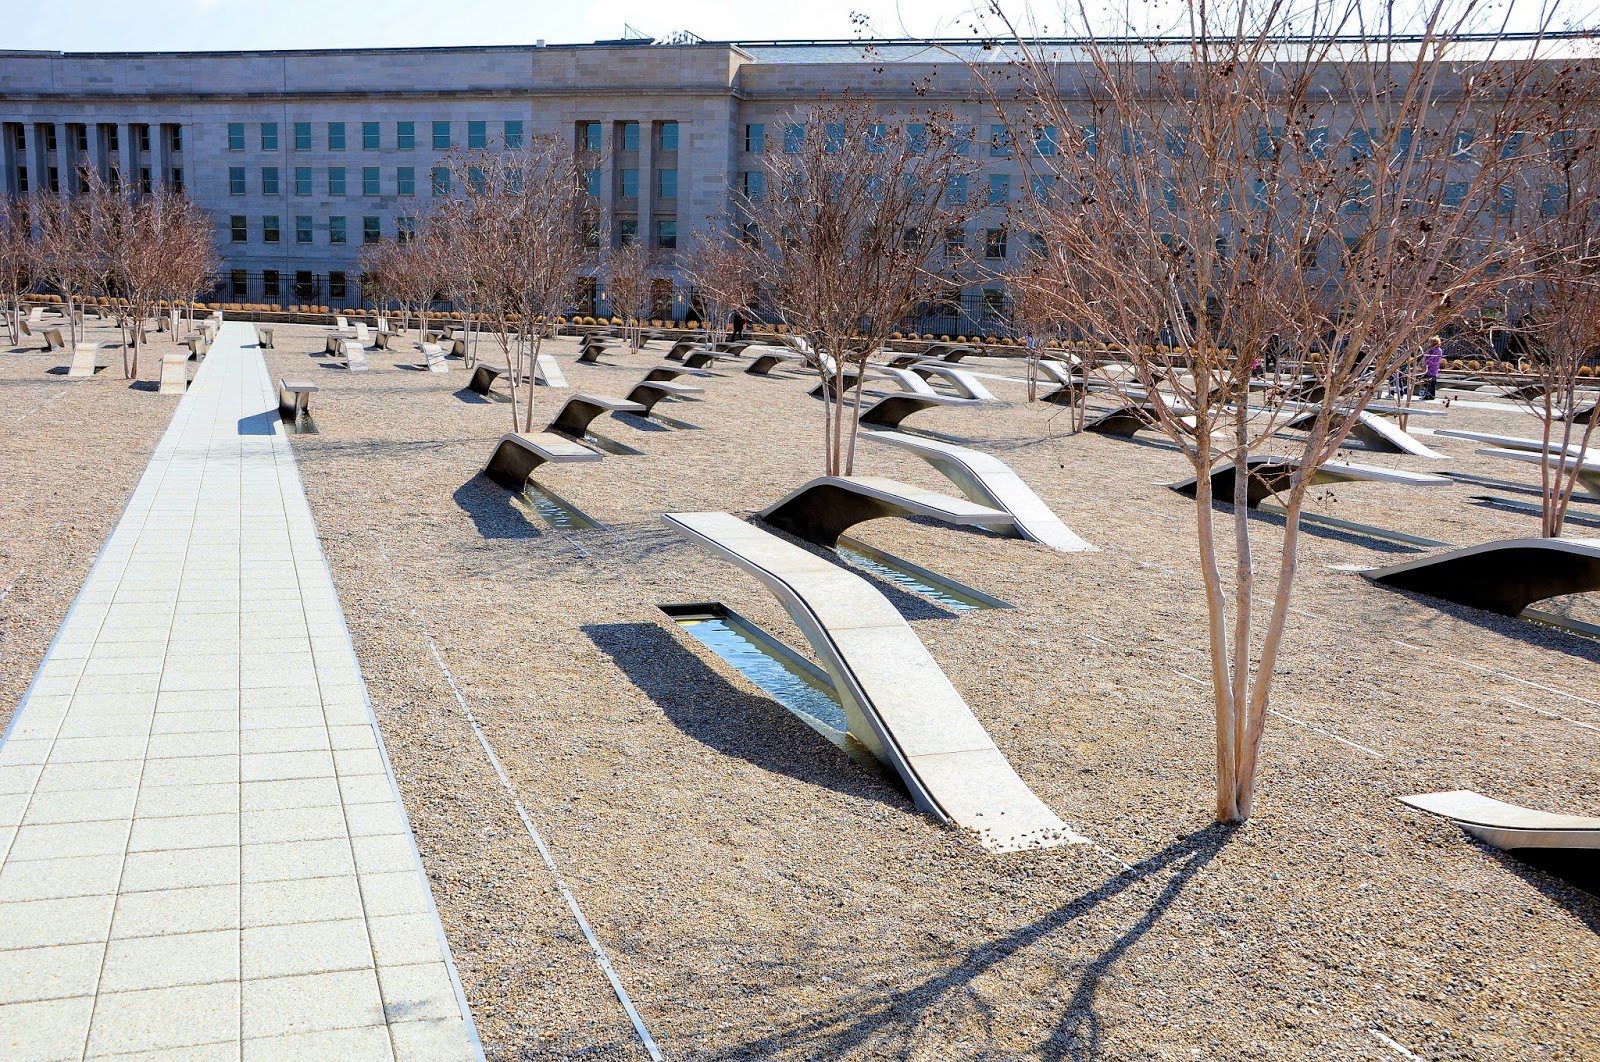 Images and More: Places 6 - The Pentagon 9/11 Memorial